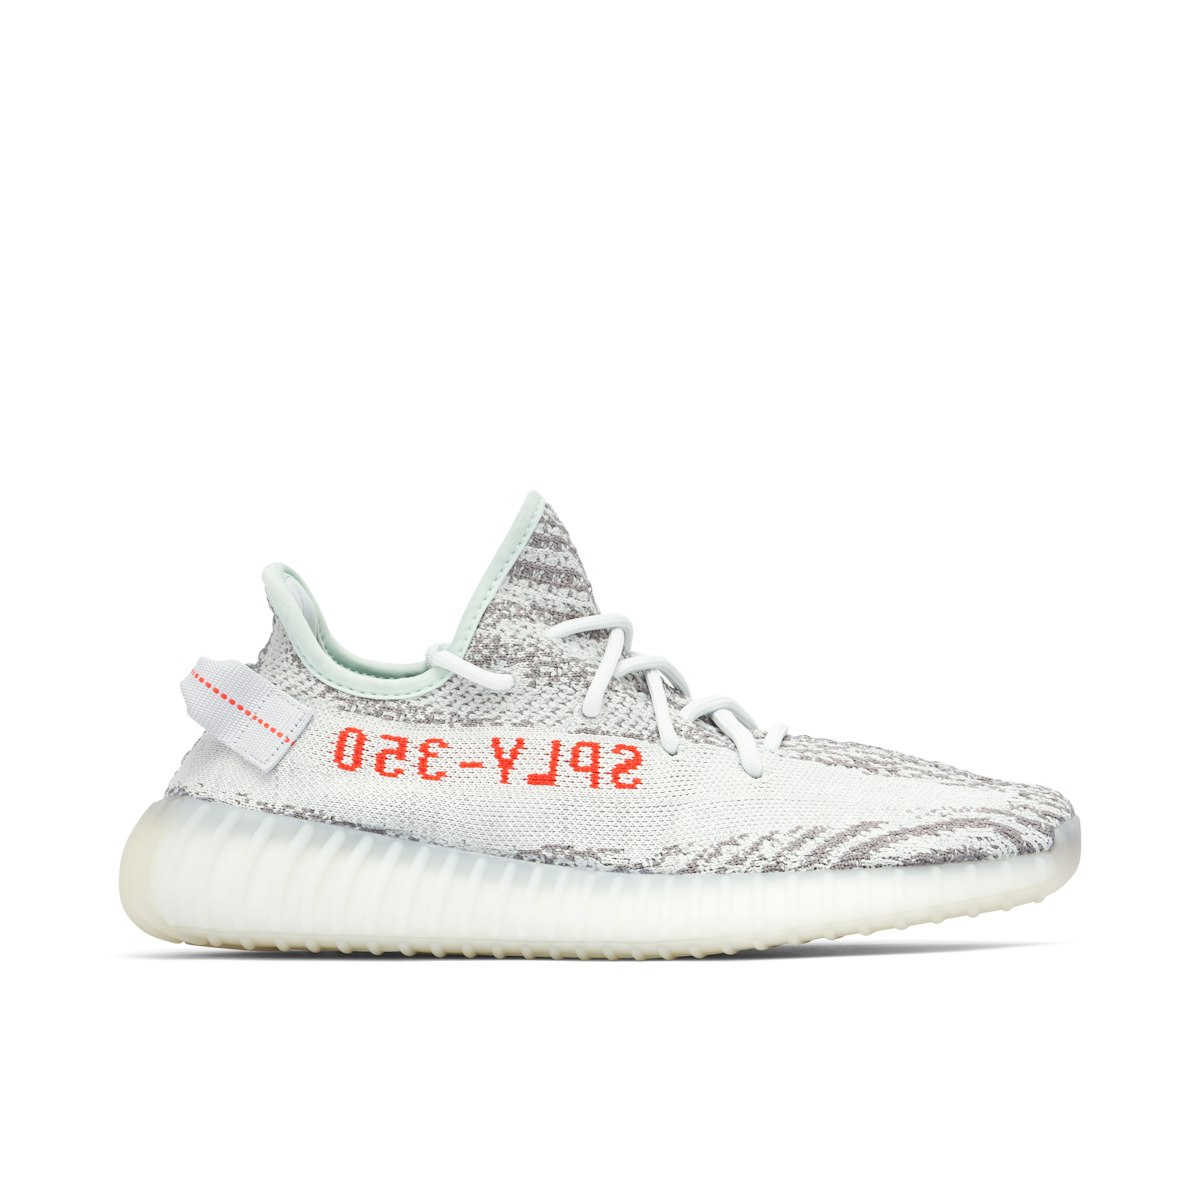 Yeezy Boost 350 V2 Tint | B37571 Laced